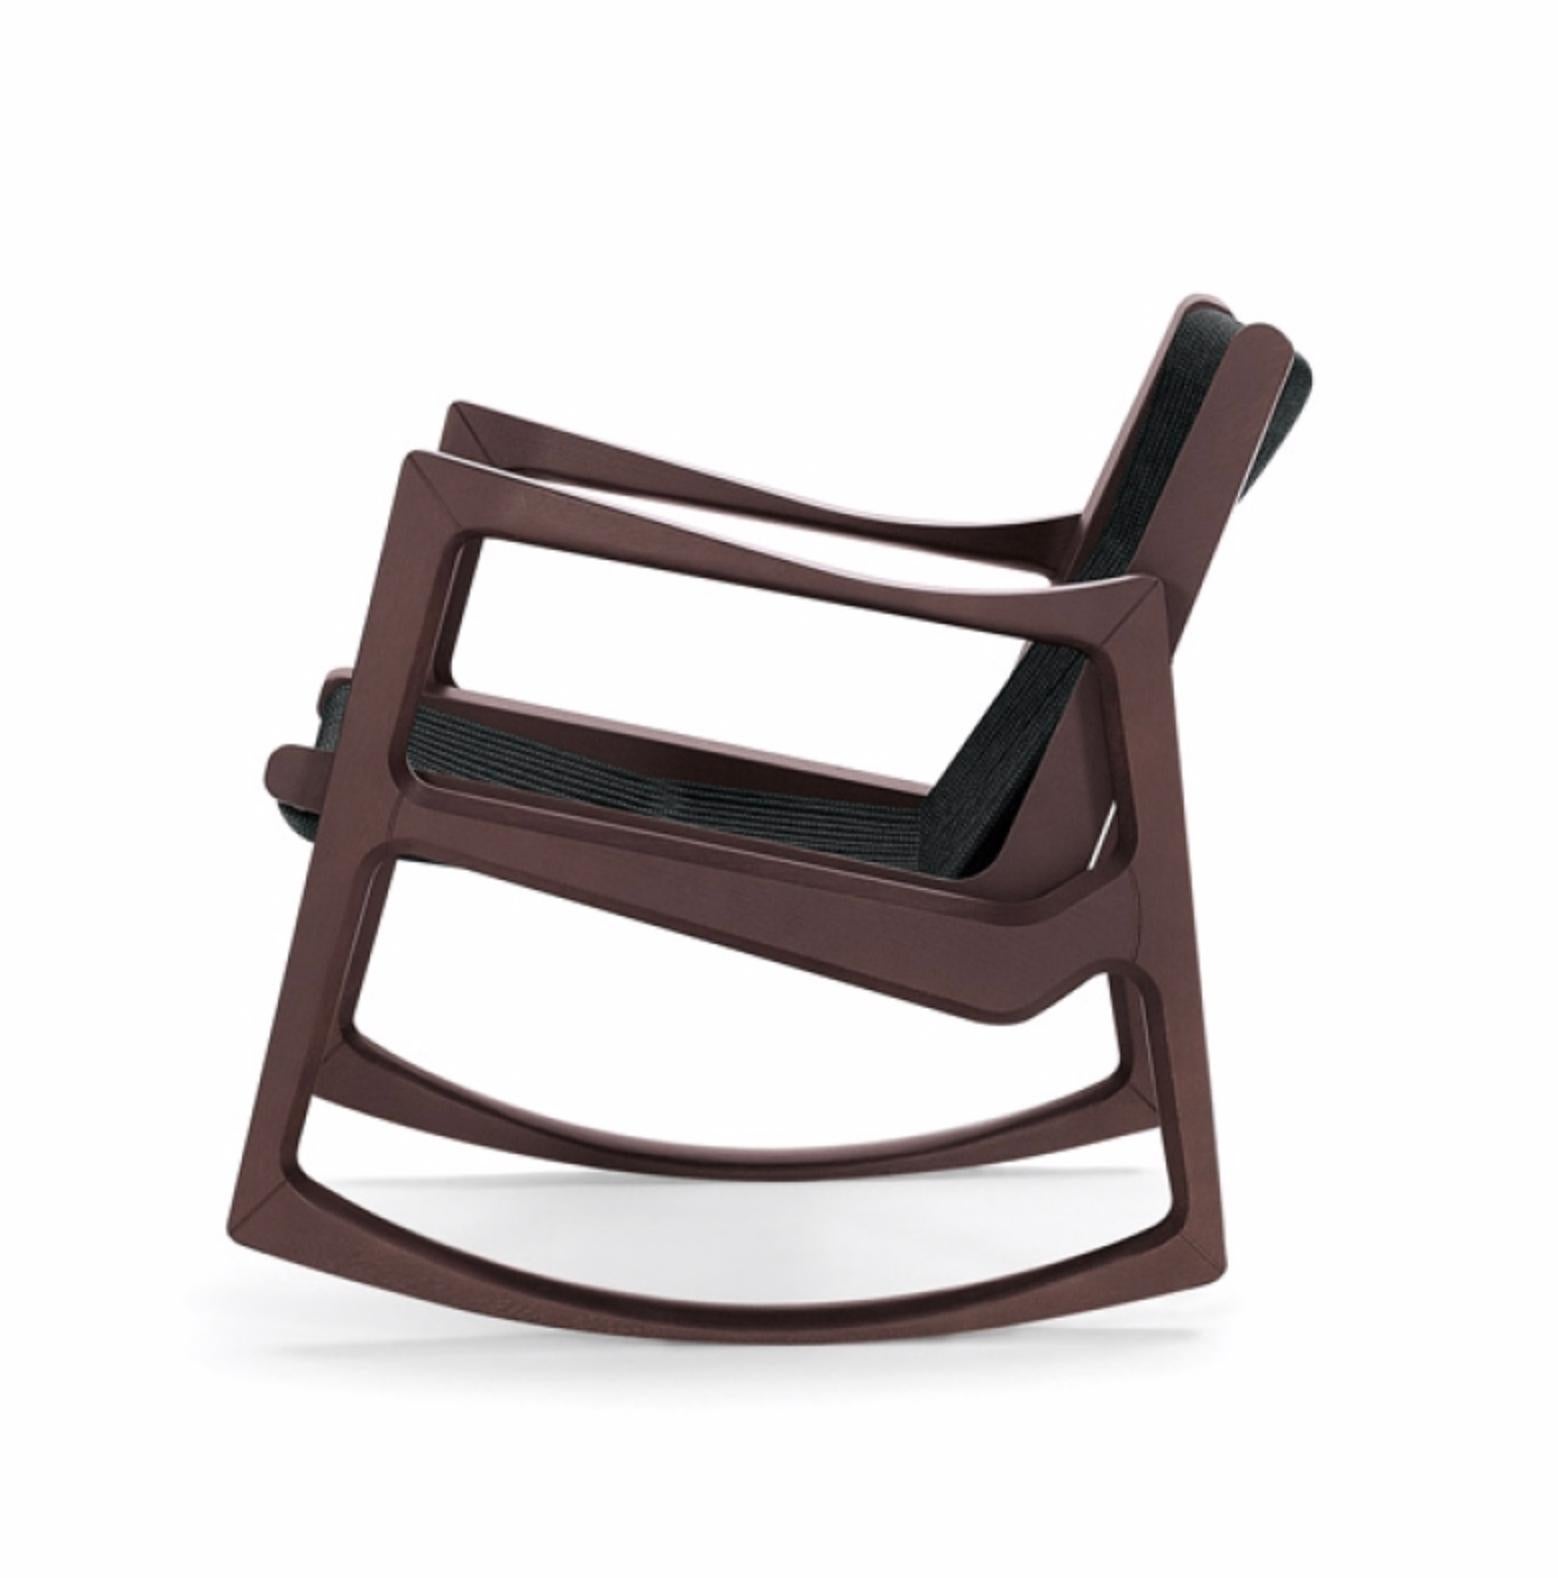 The Euvira rocking chair by Jader Almeida is a masterful blend of yesterday and today, lightness and solidity. With its precisely orchestrated flowing lines, thickening and tapering to form a pleasing rhythm, the chair is a signature expression of